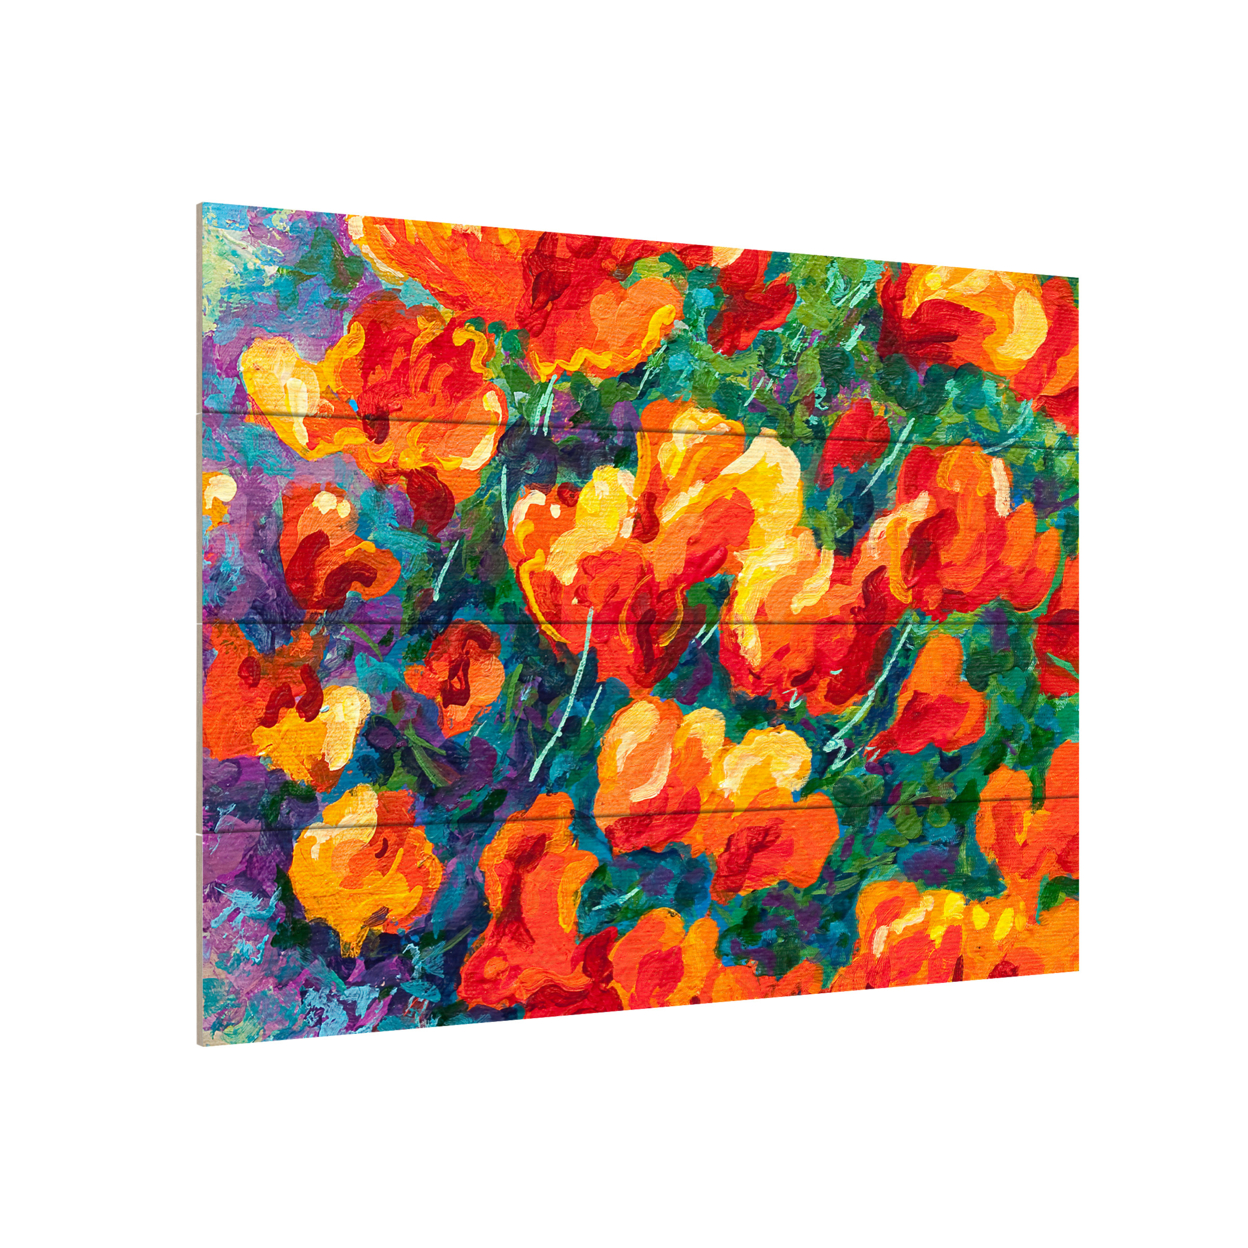 Wall Art 12 X 16 Inches Titled Cal Poppies Ready To Hang Printed On Wooden Planks